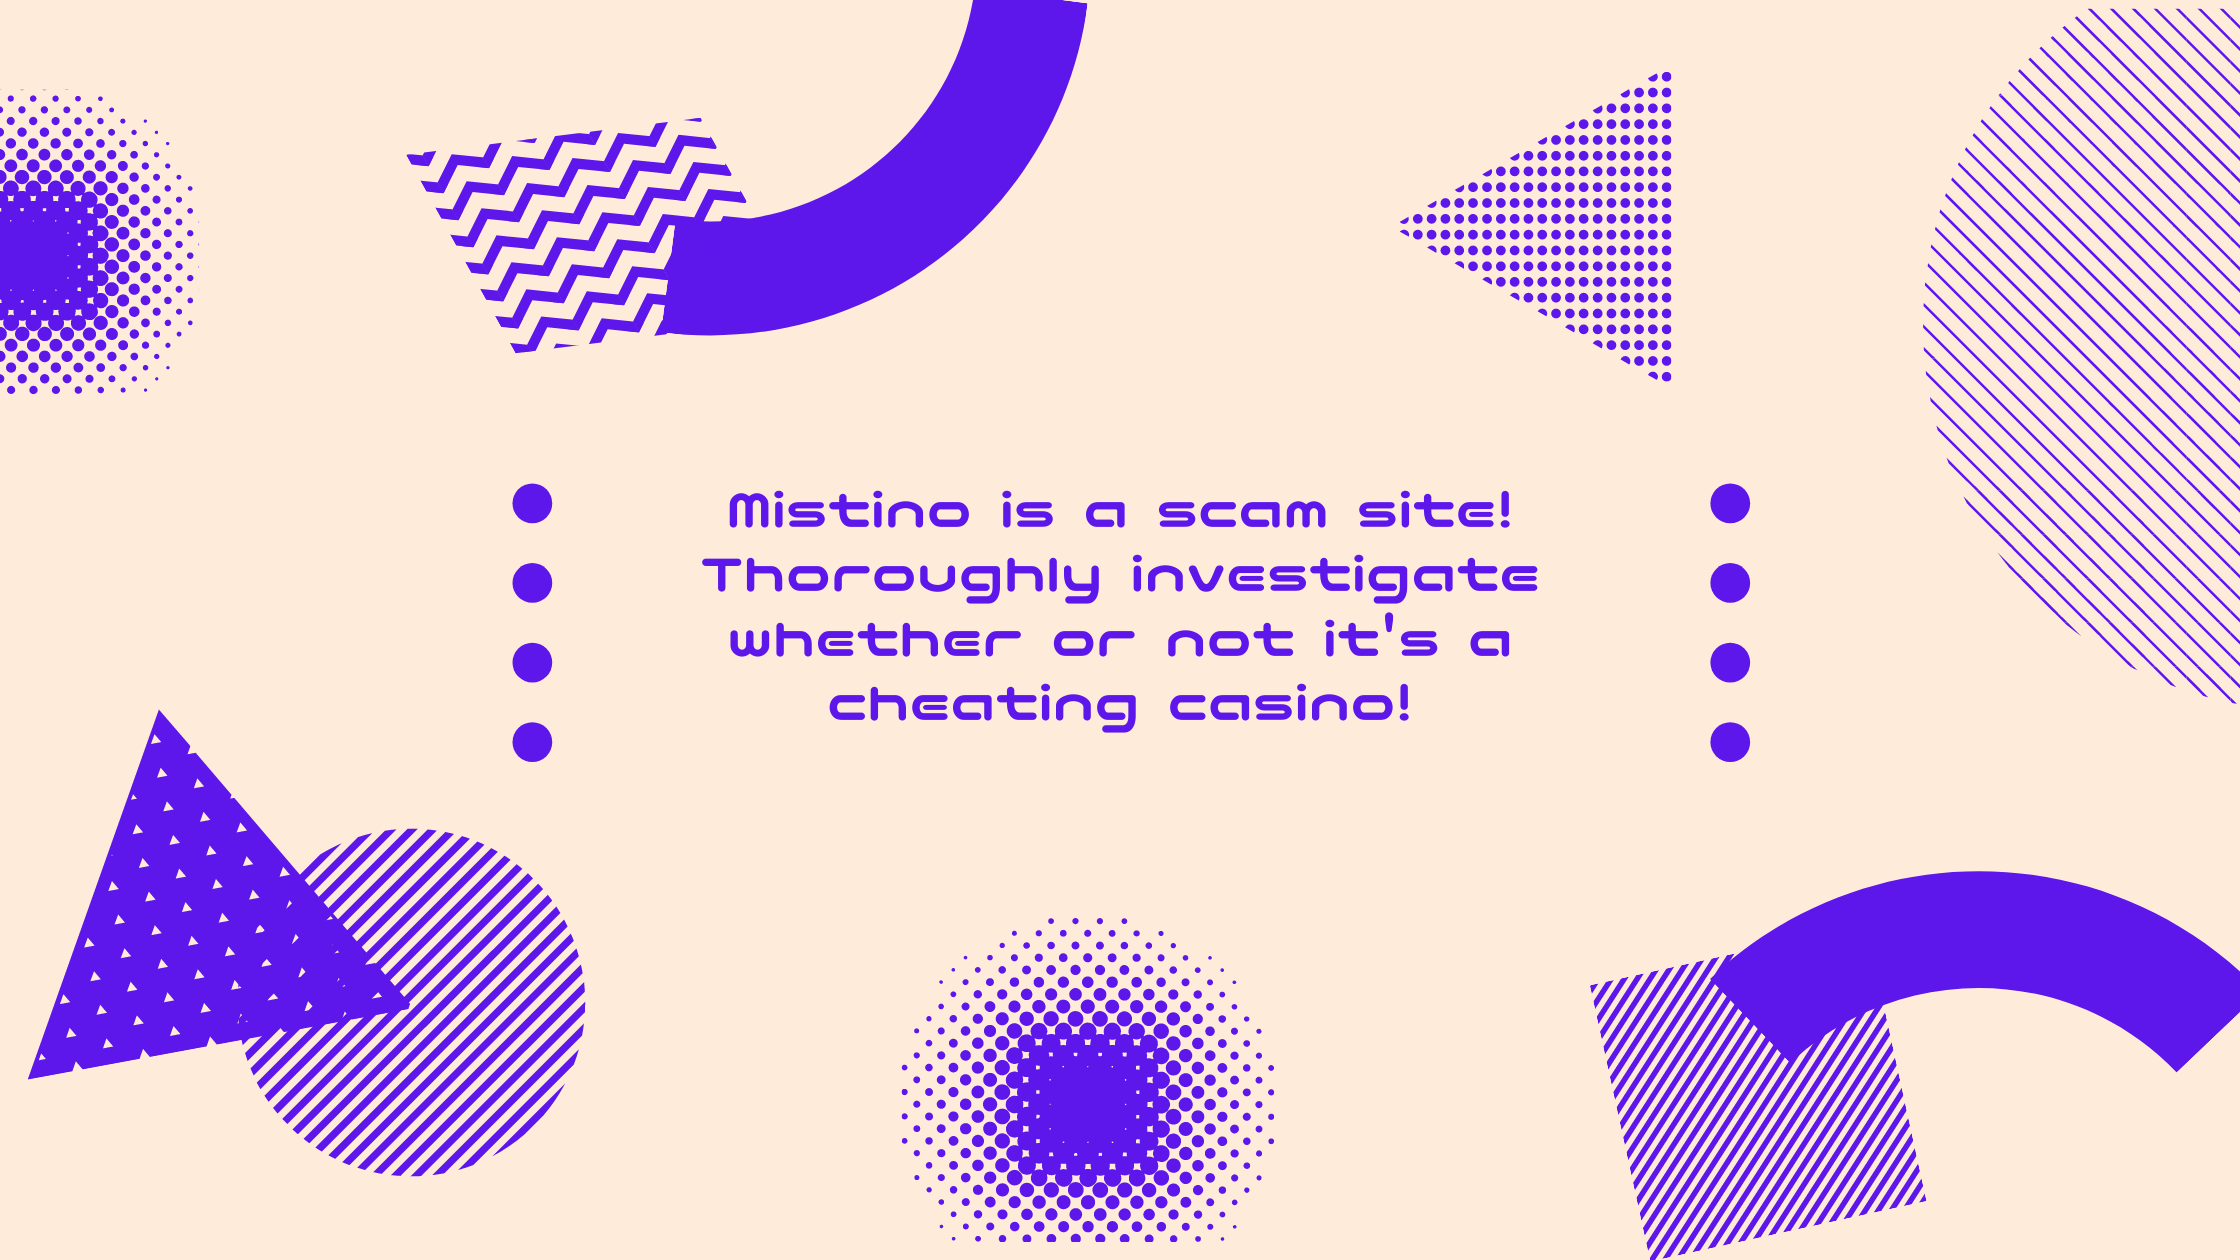 Mistino is a scam site! Thoroughly investigate whether or not it's a cheating casino!